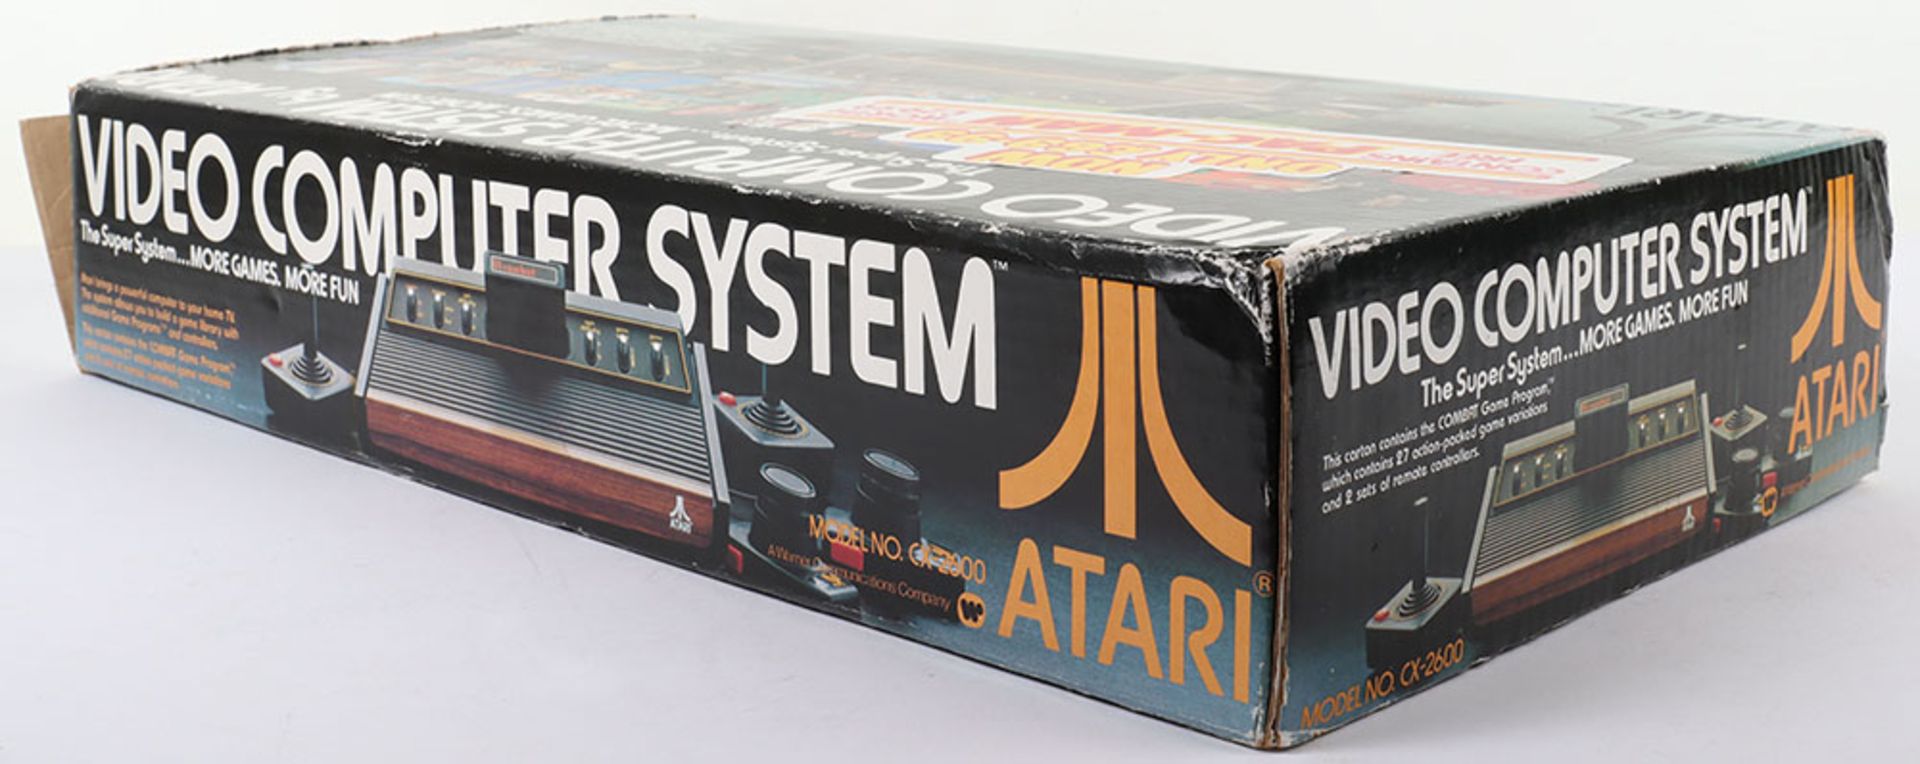 Vintage Atari Video Computer system CX-2600 boxed complete - Image 5 of 8